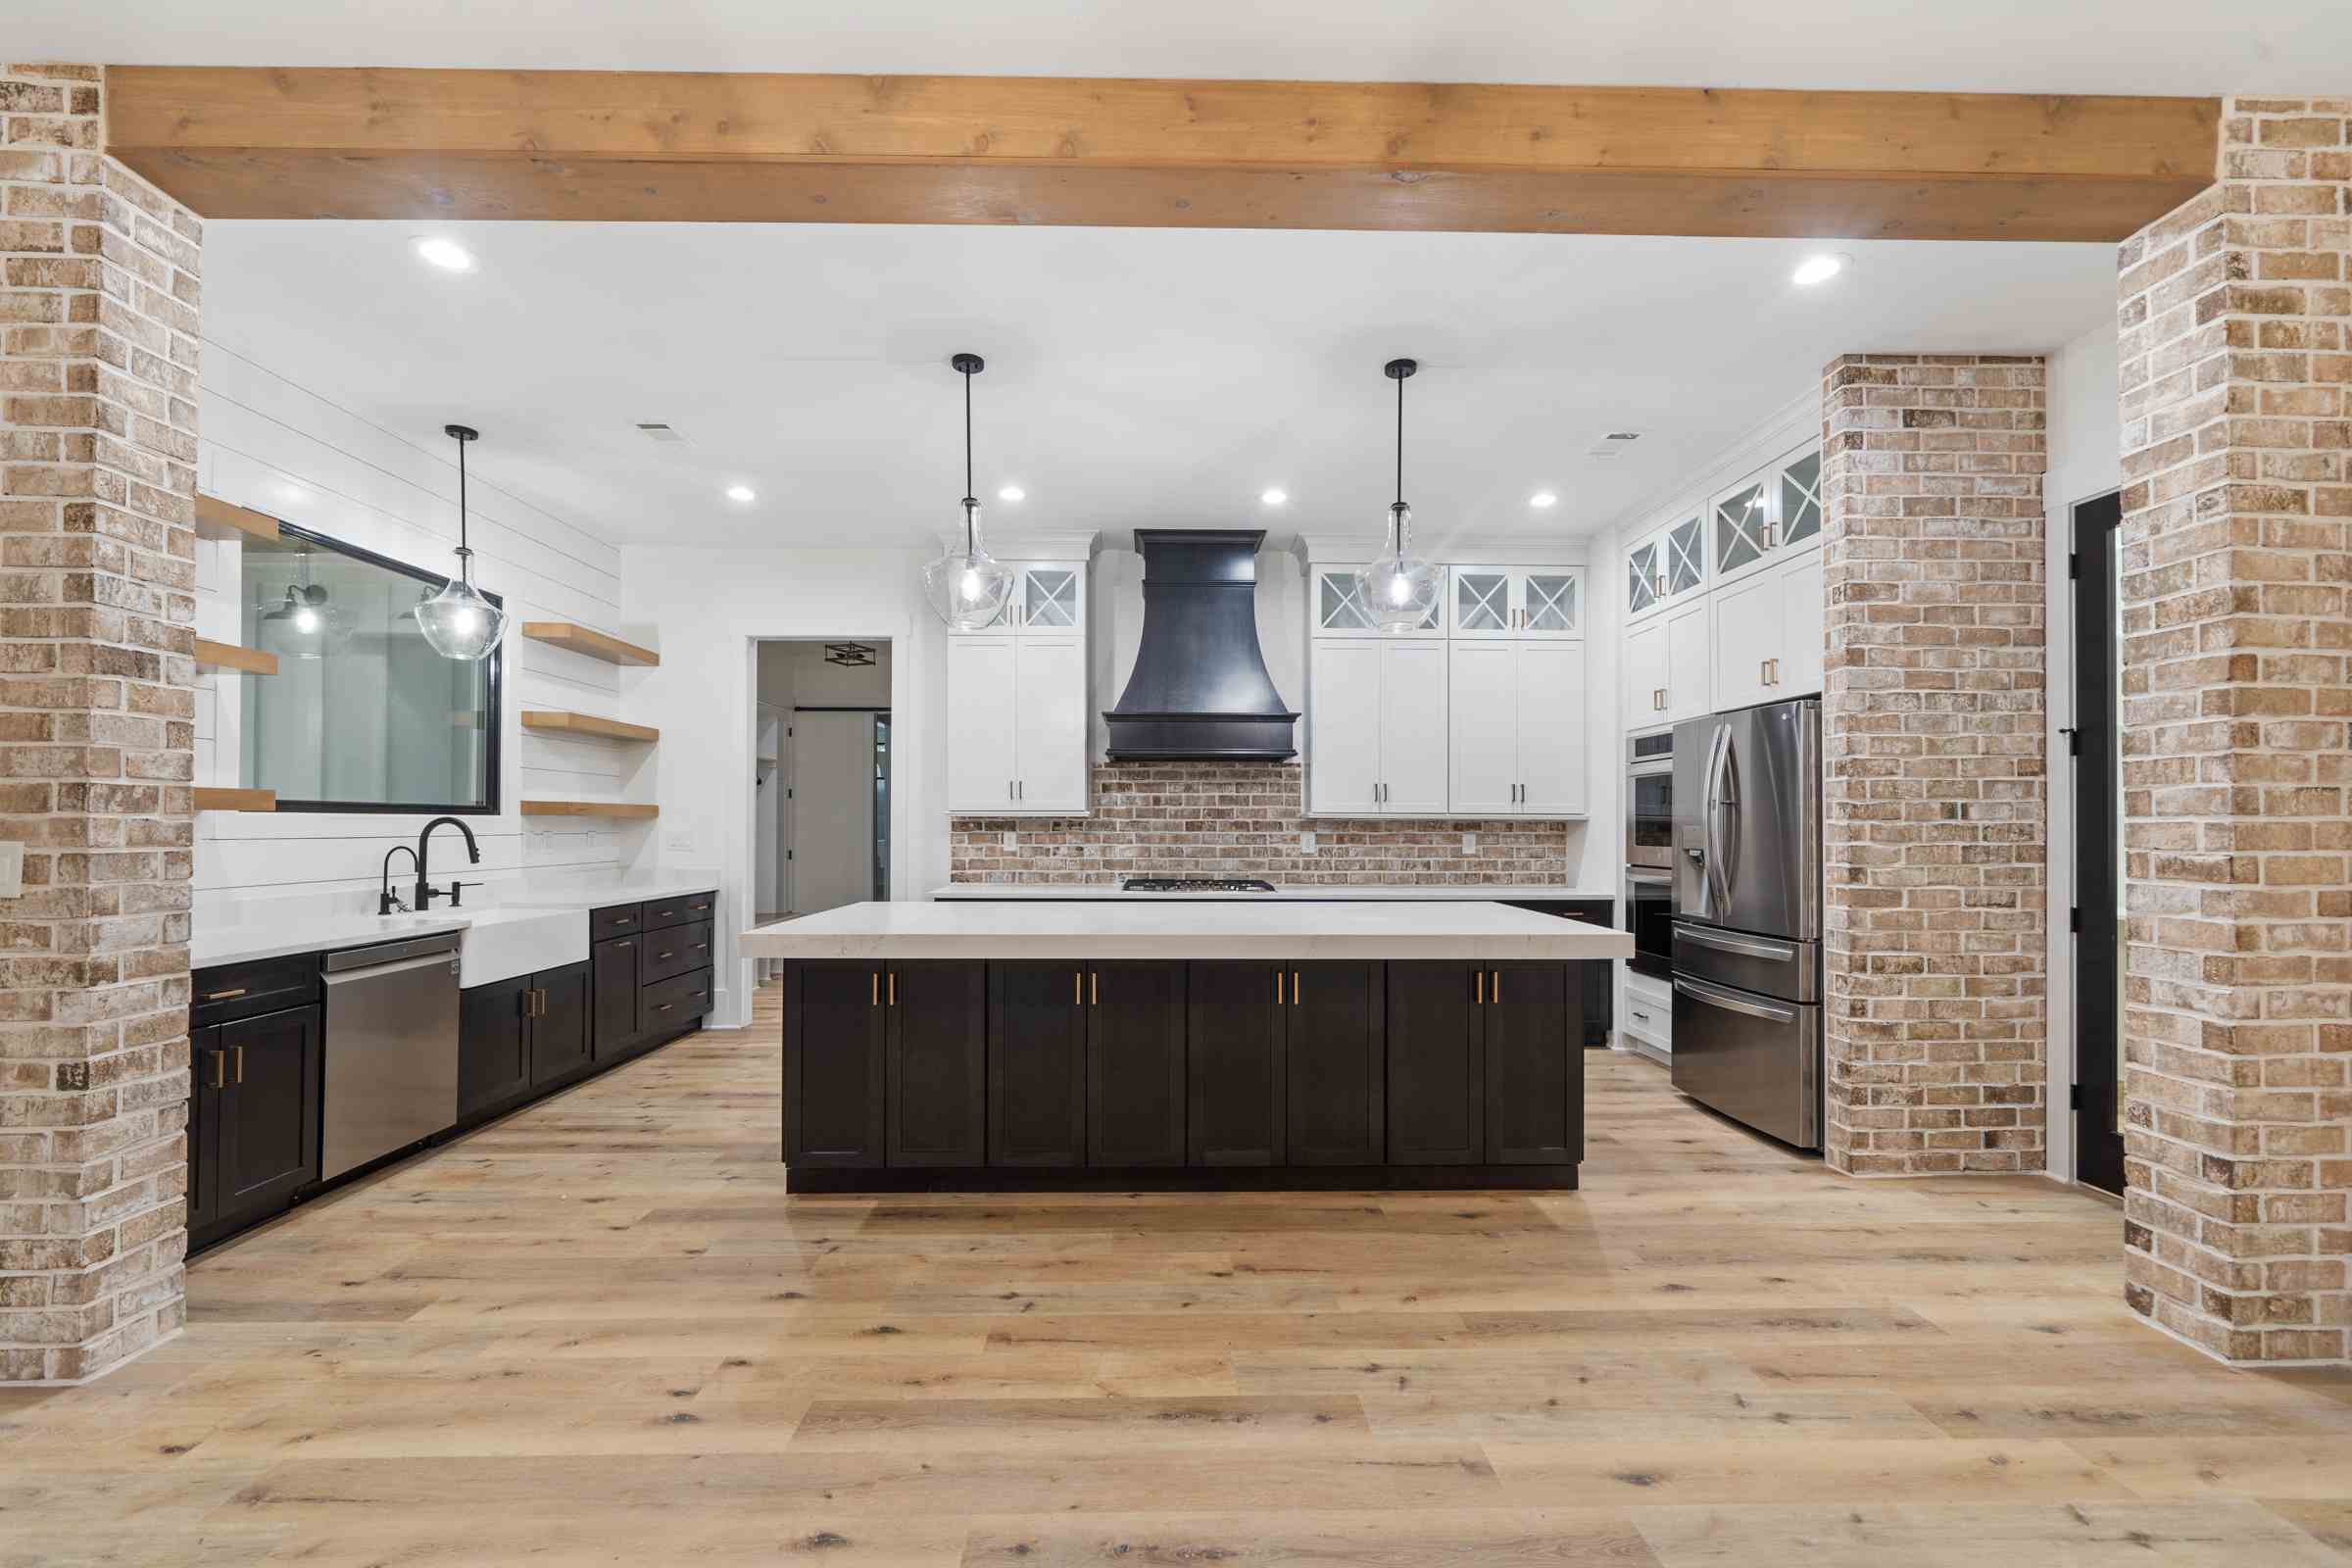 6 Paxis Indian Trail kitchen view from living area, large island, exposed brick, shiplap, farmhouse | Paxisgroup